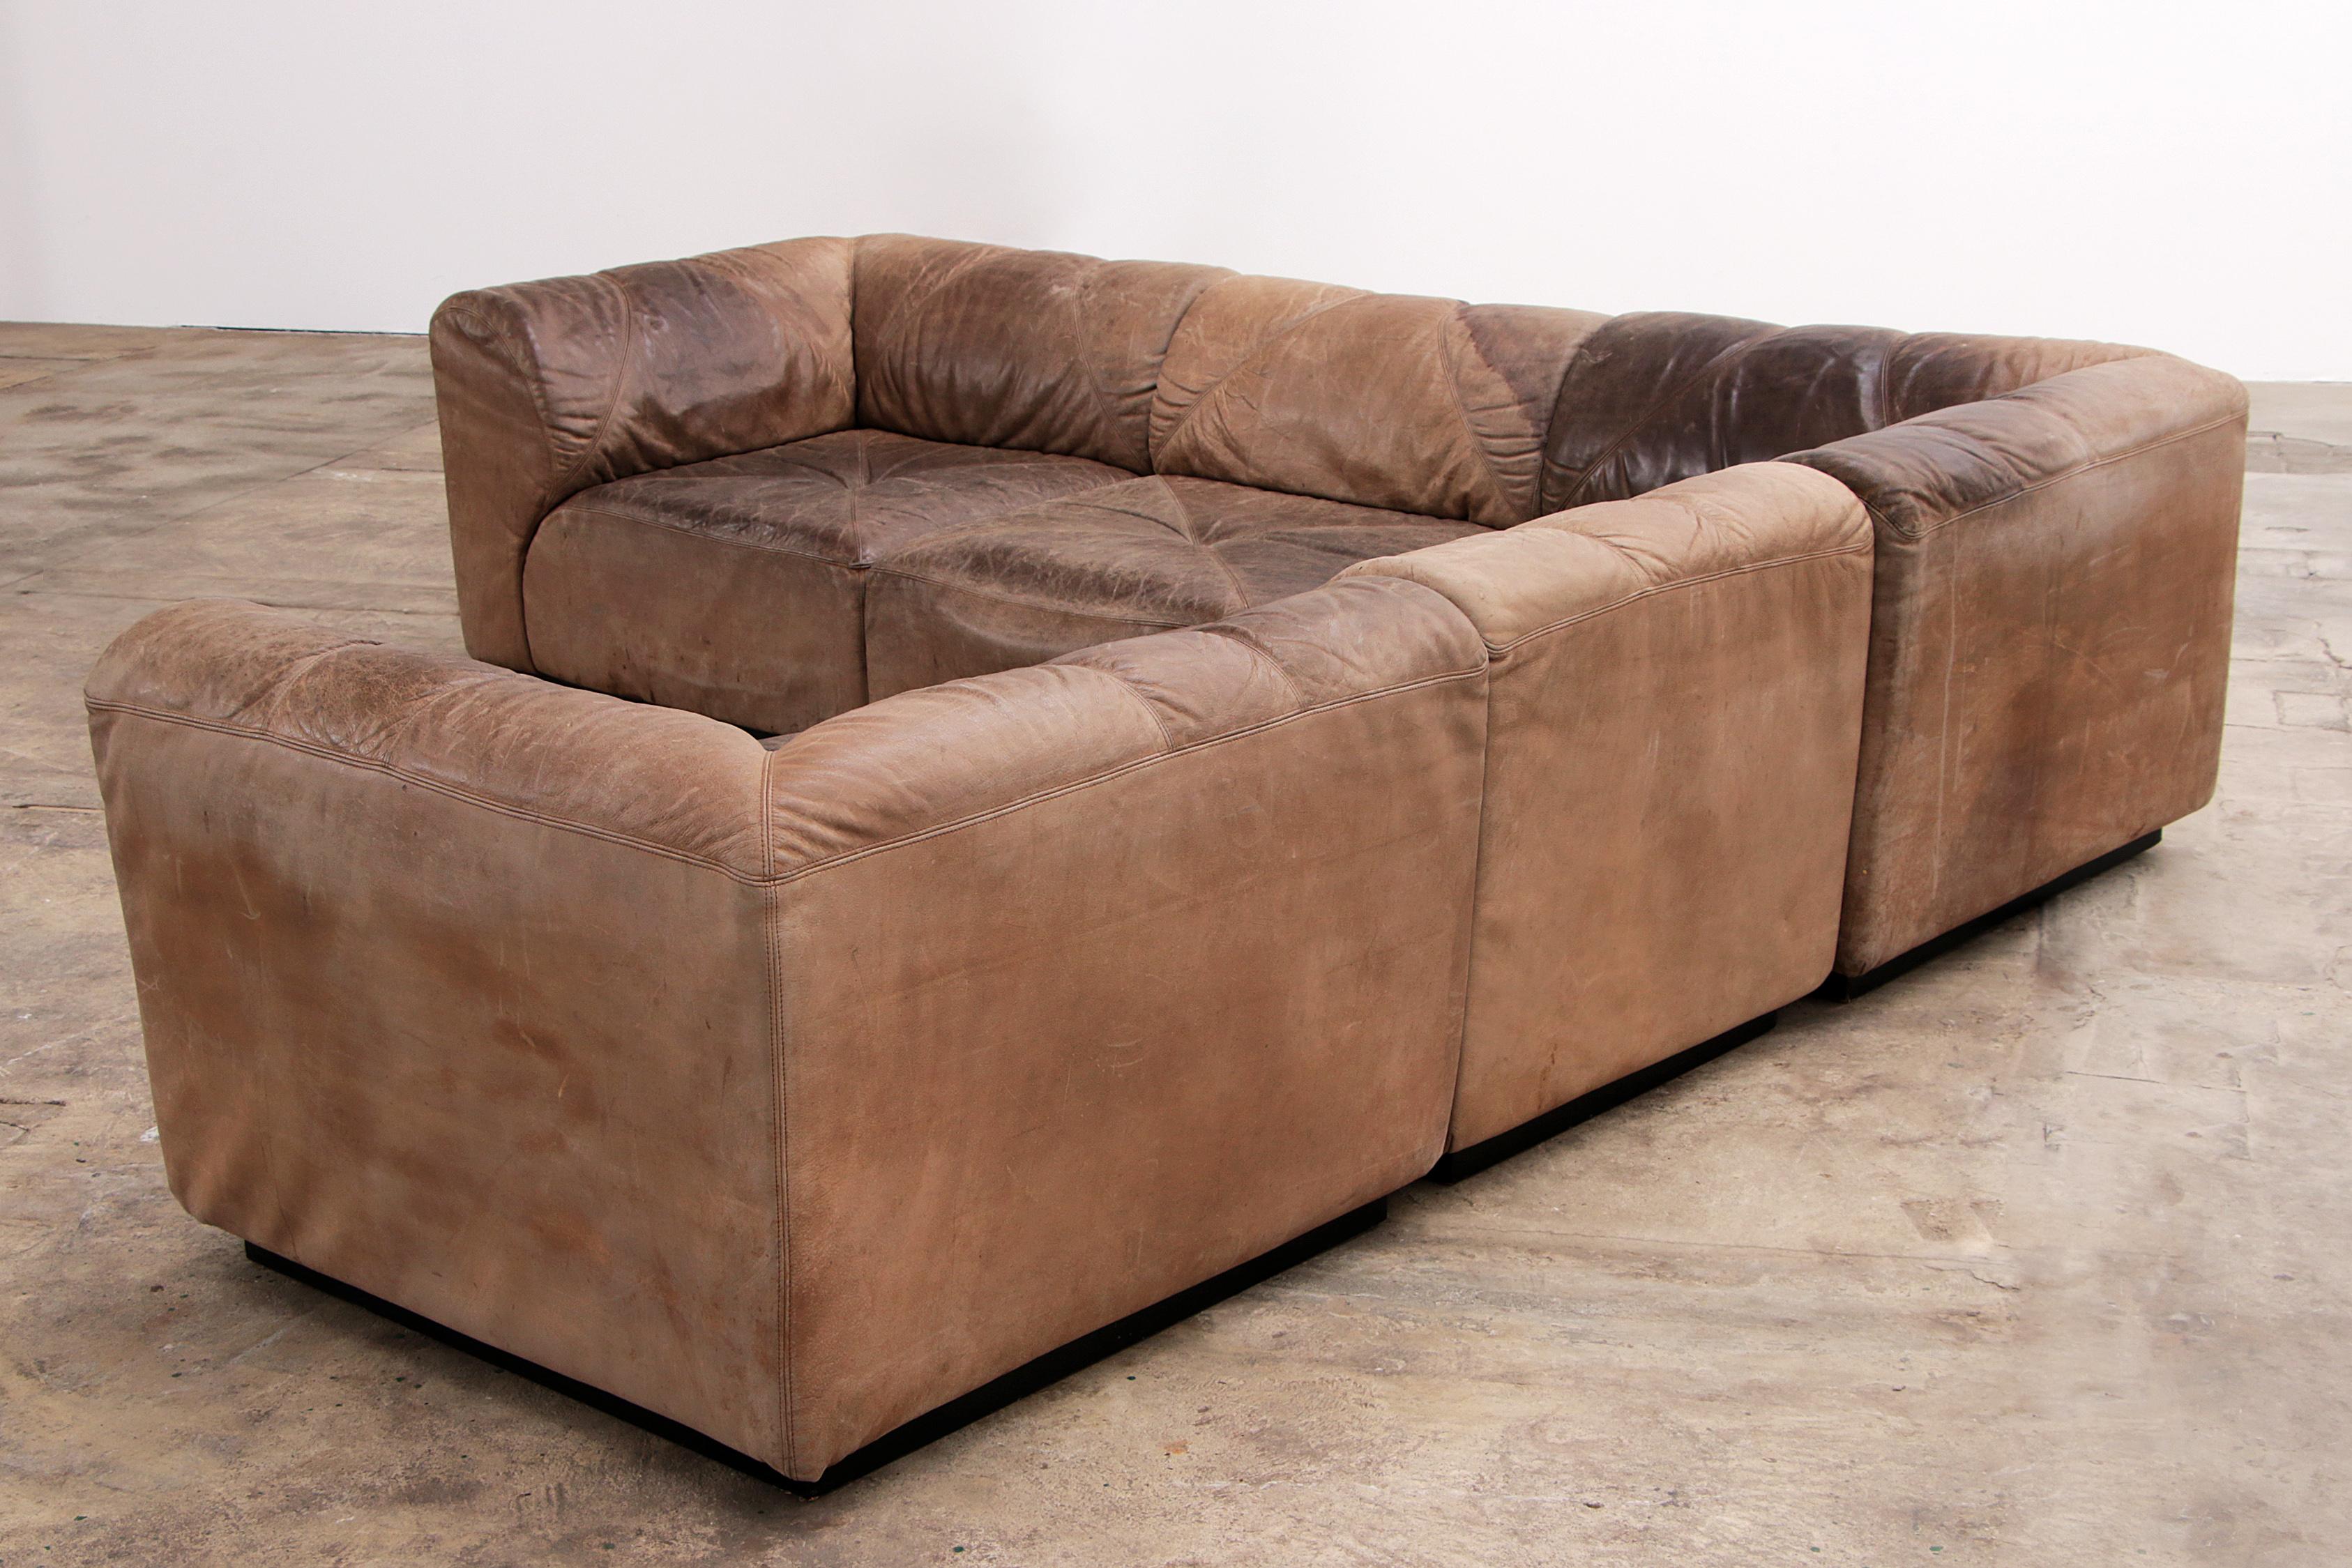 Late 20th Century Modular Vintage Leather Sofa by Bernd Münzebrock for Walter Knoll For Sale